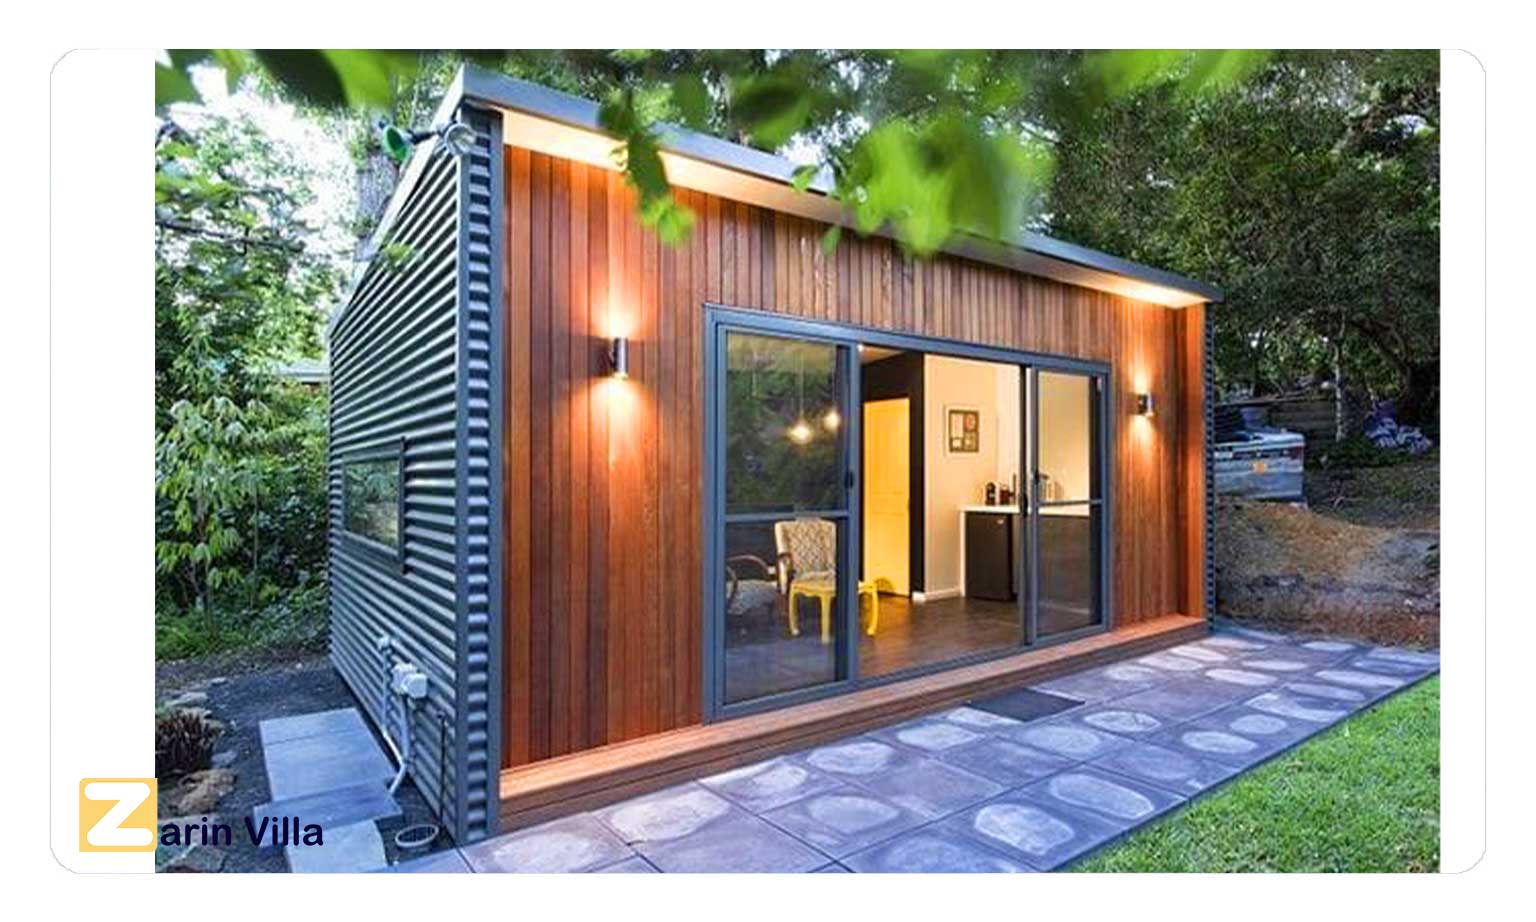 The price of a prefabricated house of 80 meters